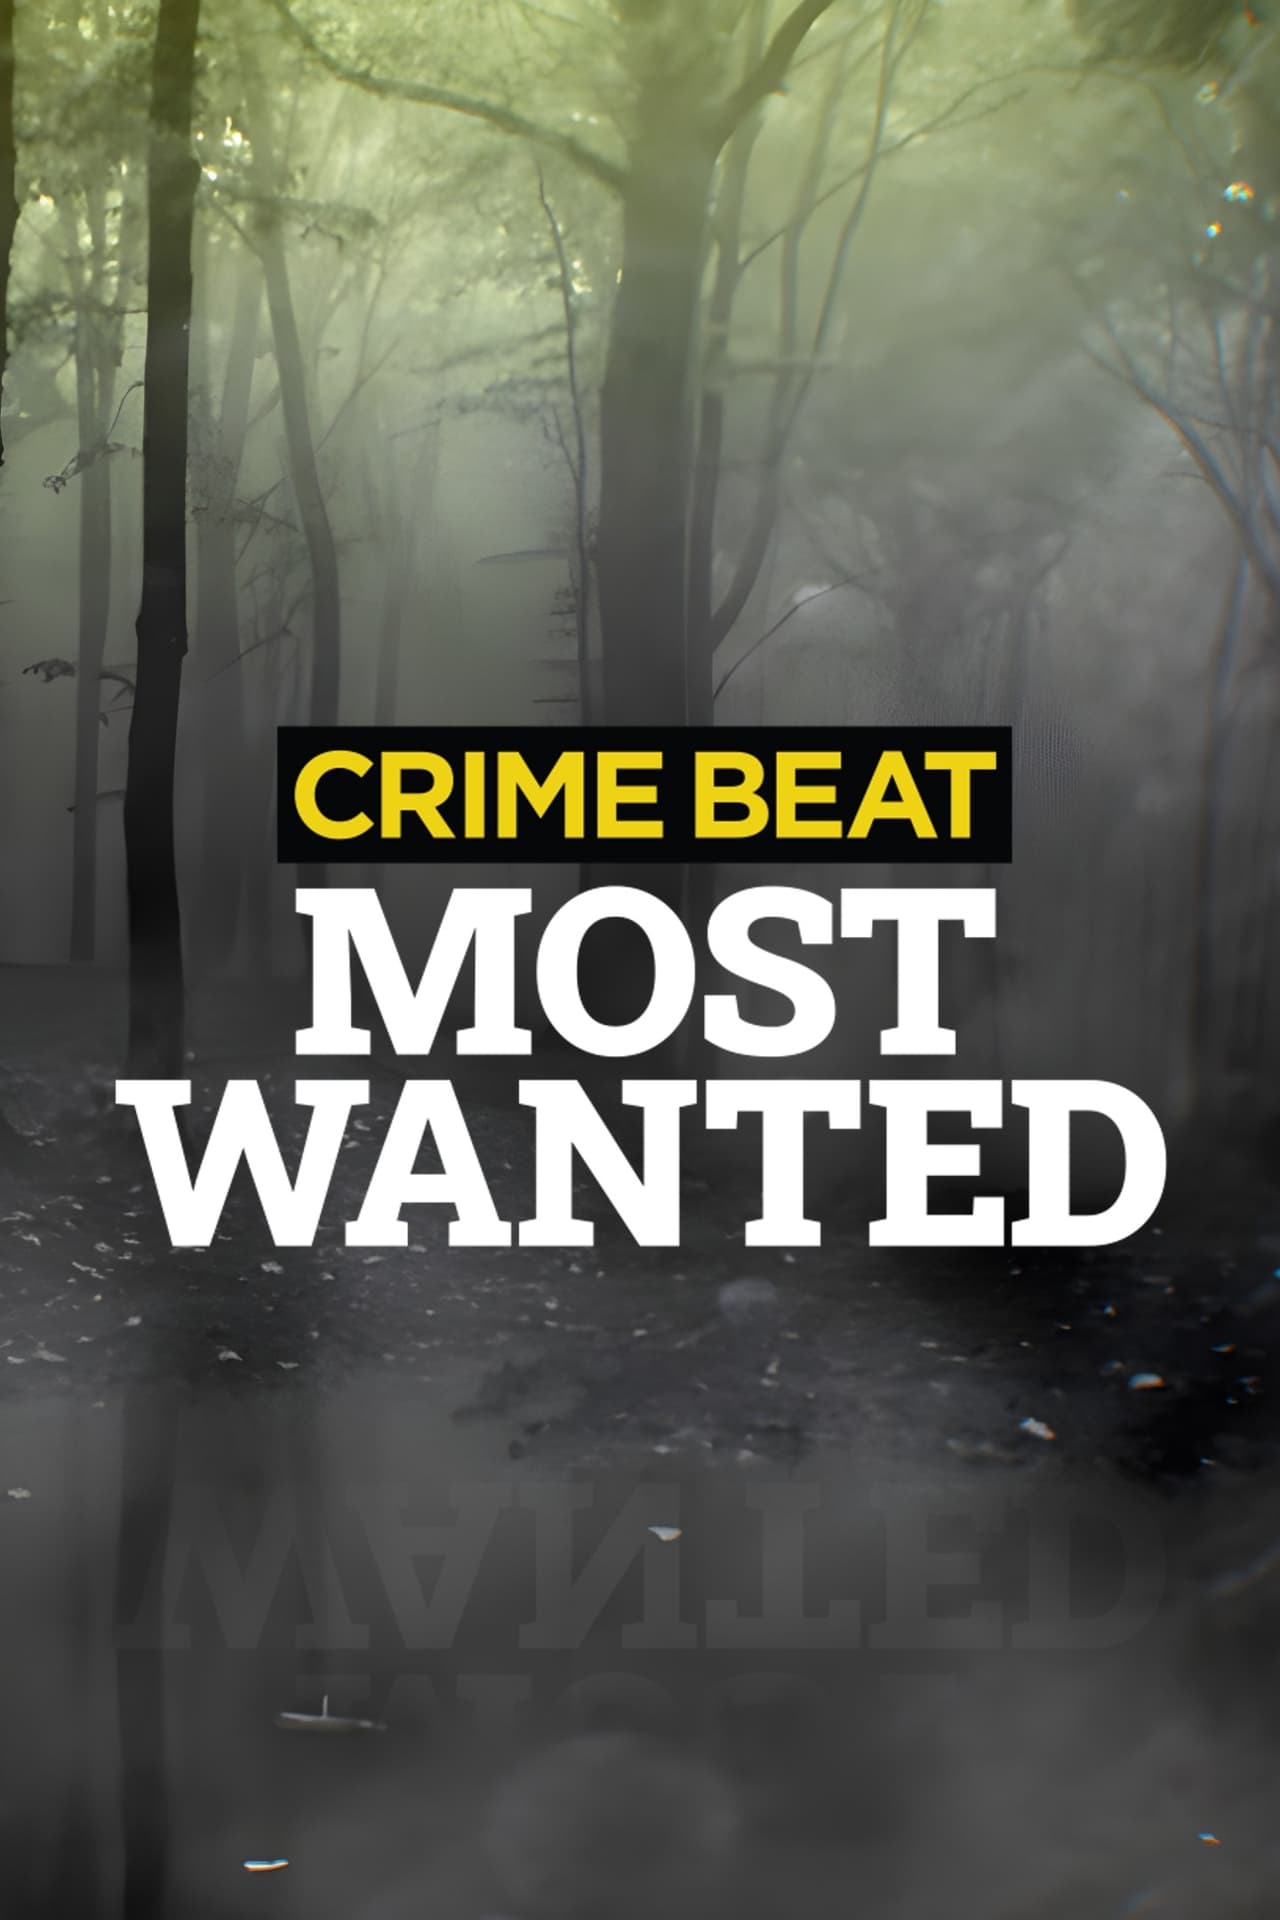 Crime Beat: Most Wanted